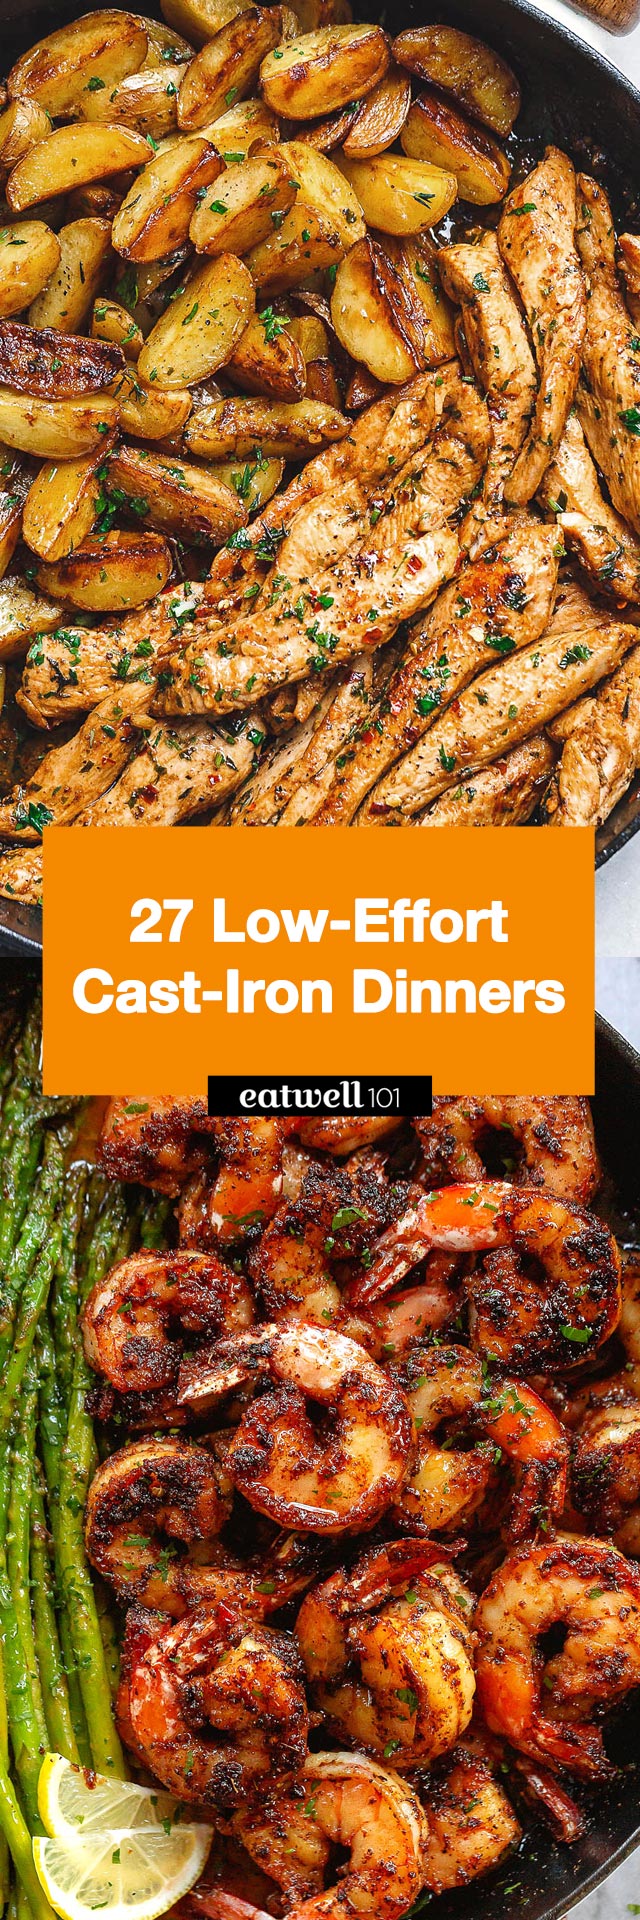 Cast-Iron Dinner Recipes - #cast-iron #dinner #recipes #eatwell101 - These cast iron skillet dinner recipes are one-pan wonders for any night of the week! 